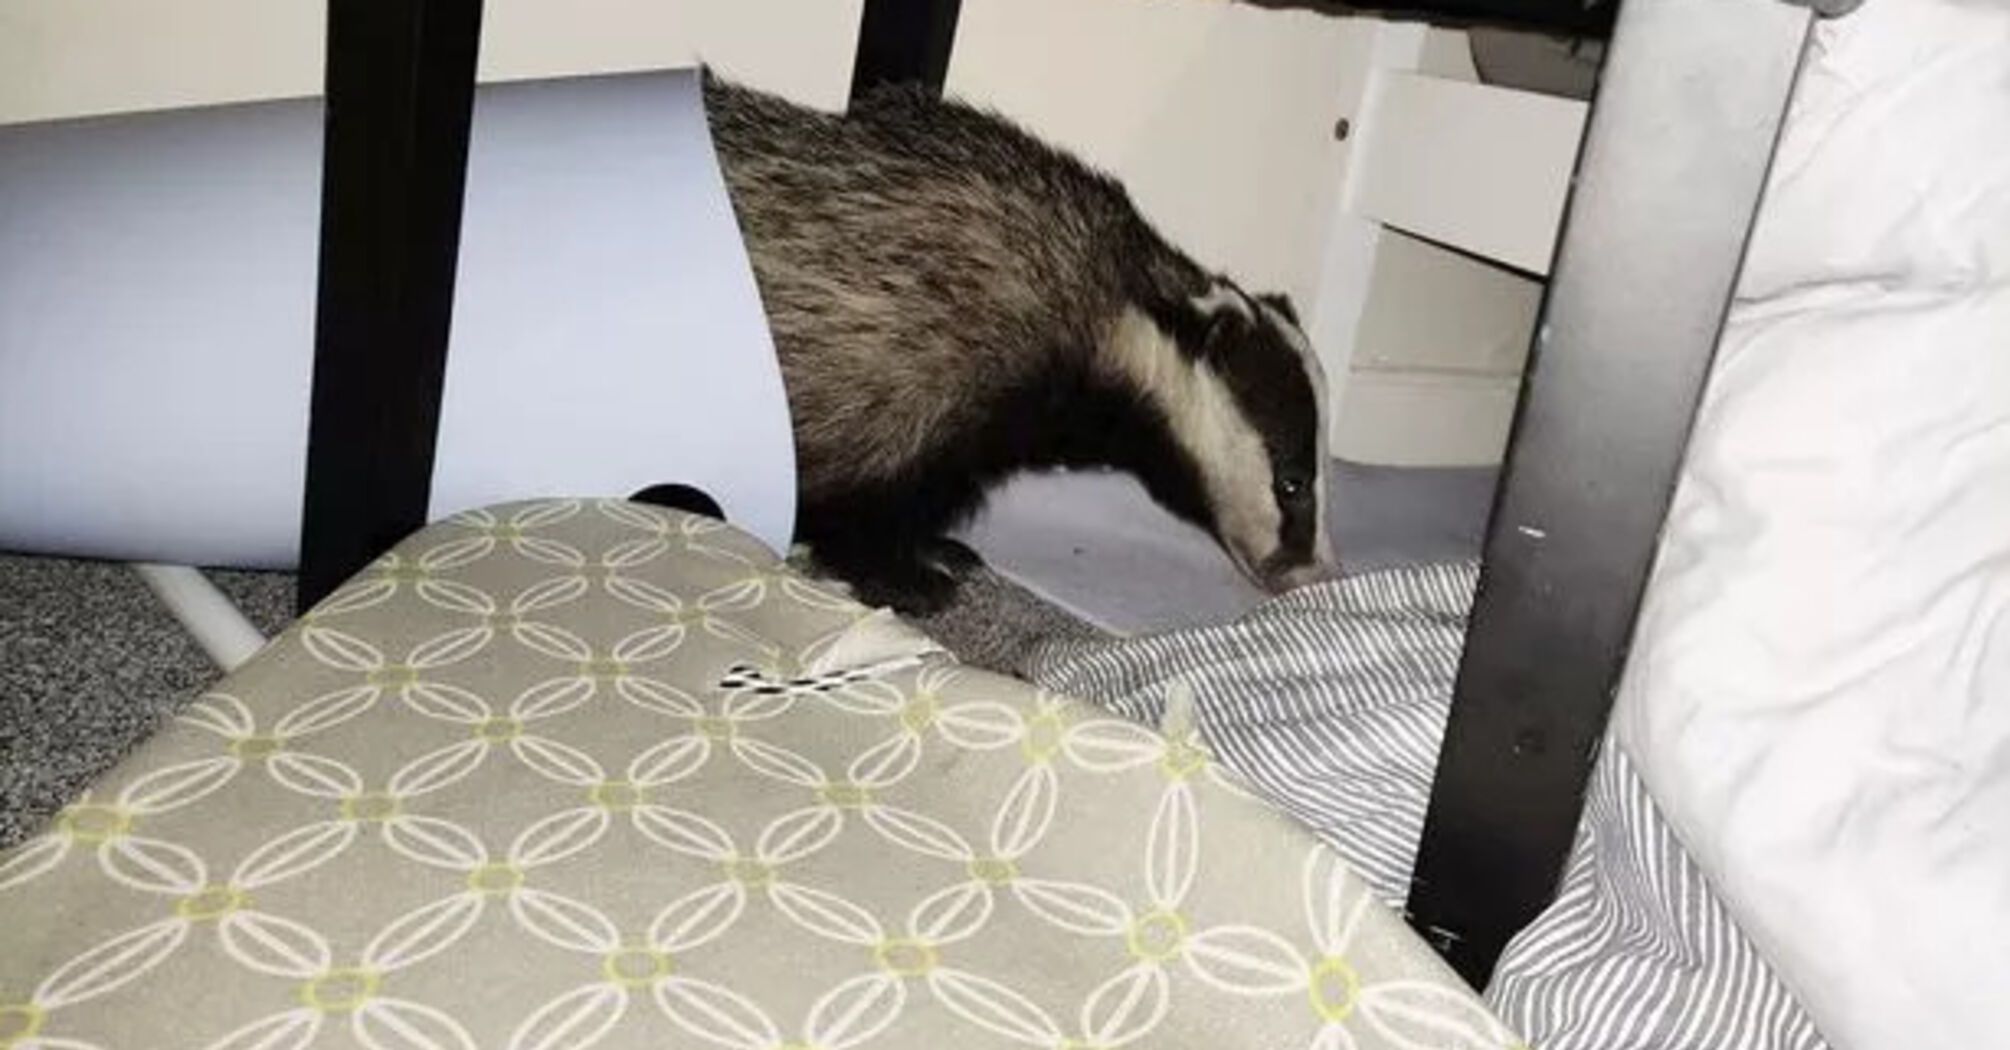 A badger broke into a woman's house and caused a mess